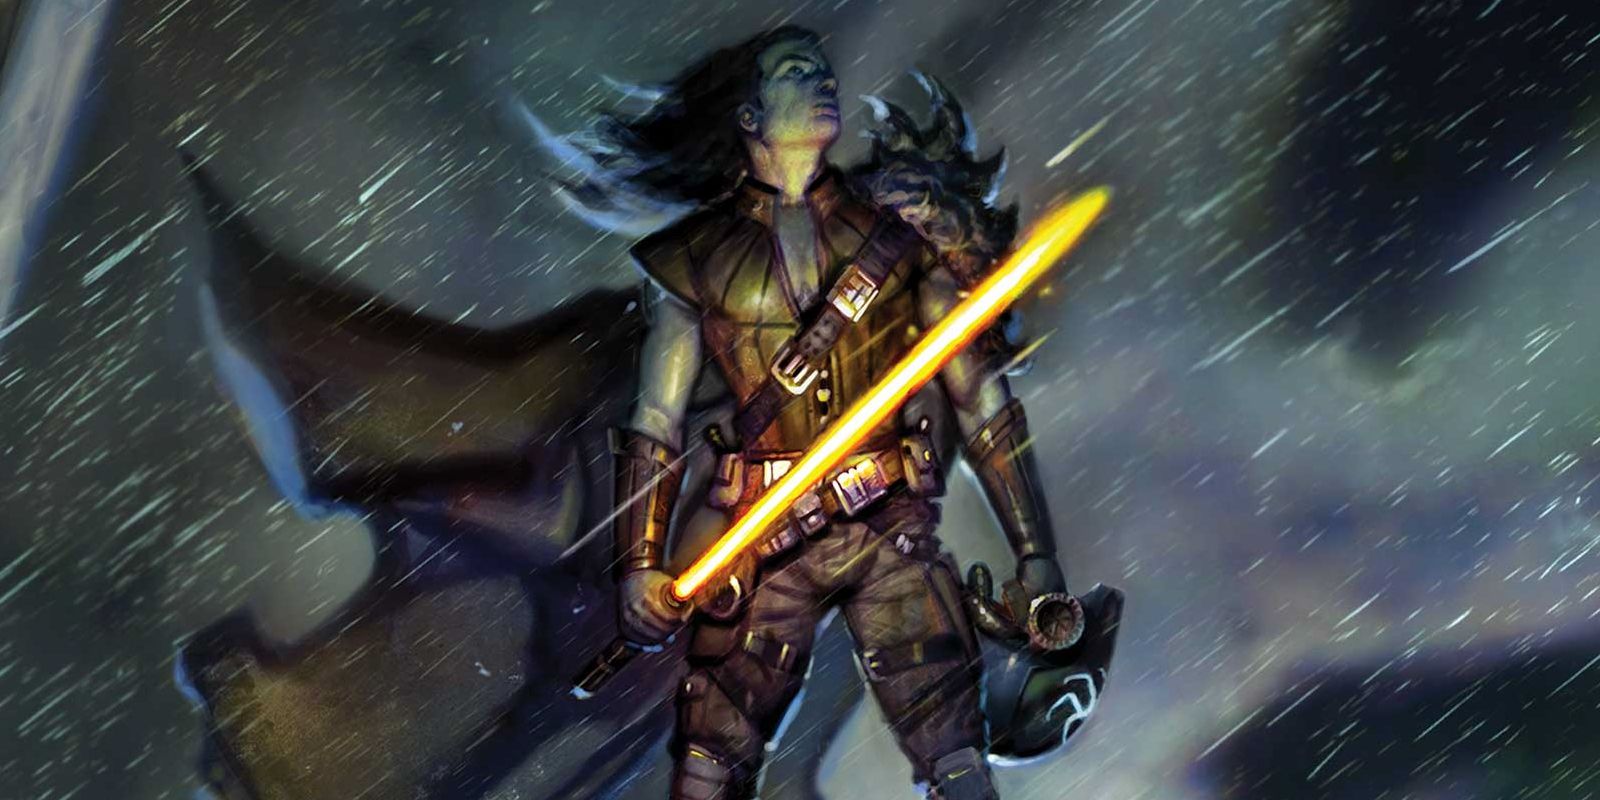 Marchion Ro holds Loden Greatstorm's lightsaber in a storm on the cover of Star Wars The High Republic Eye of the Storm